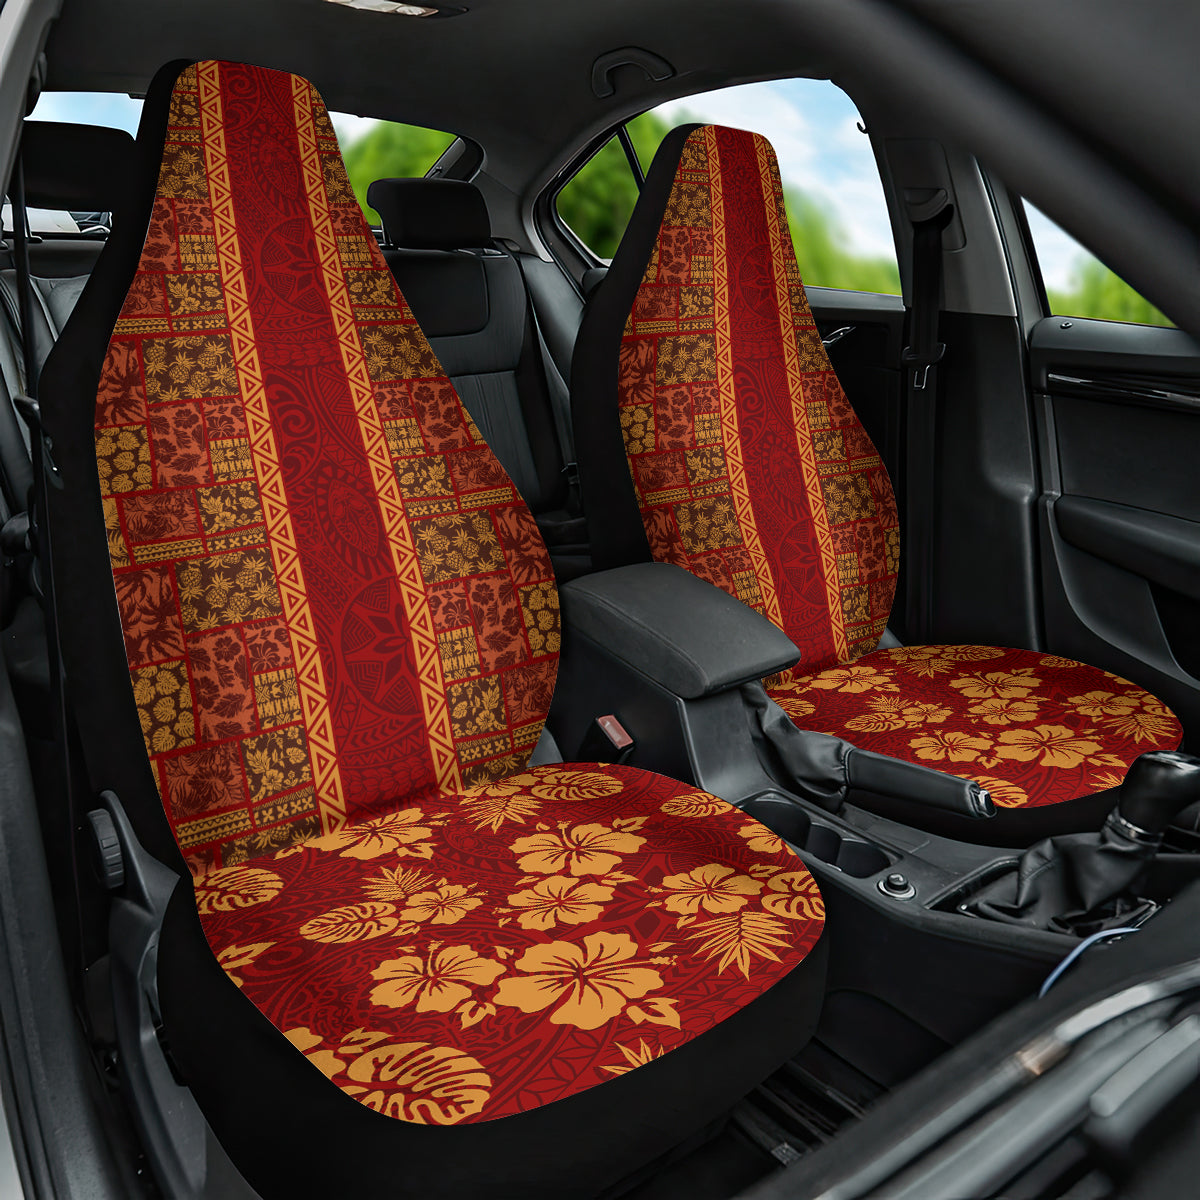 Hawaii Style Hibiscus and Tribal Element Fabric Patchwork Car Seat Cover LT03 One Size Red - Polynesian Pride